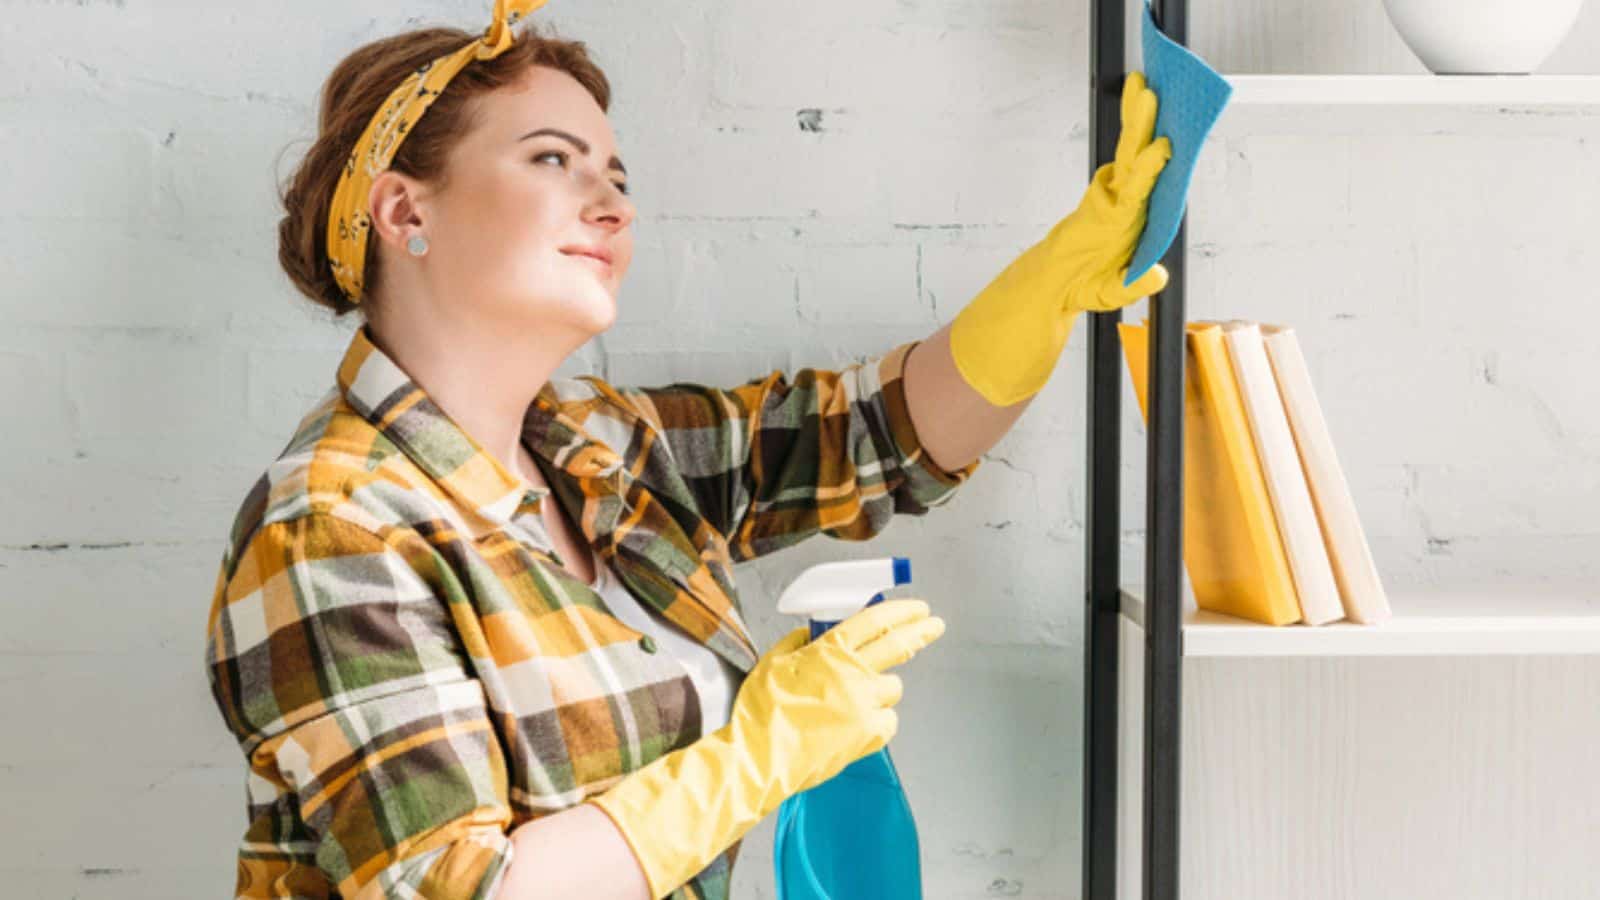 Beautiful woman dusting cleaning shelves at home